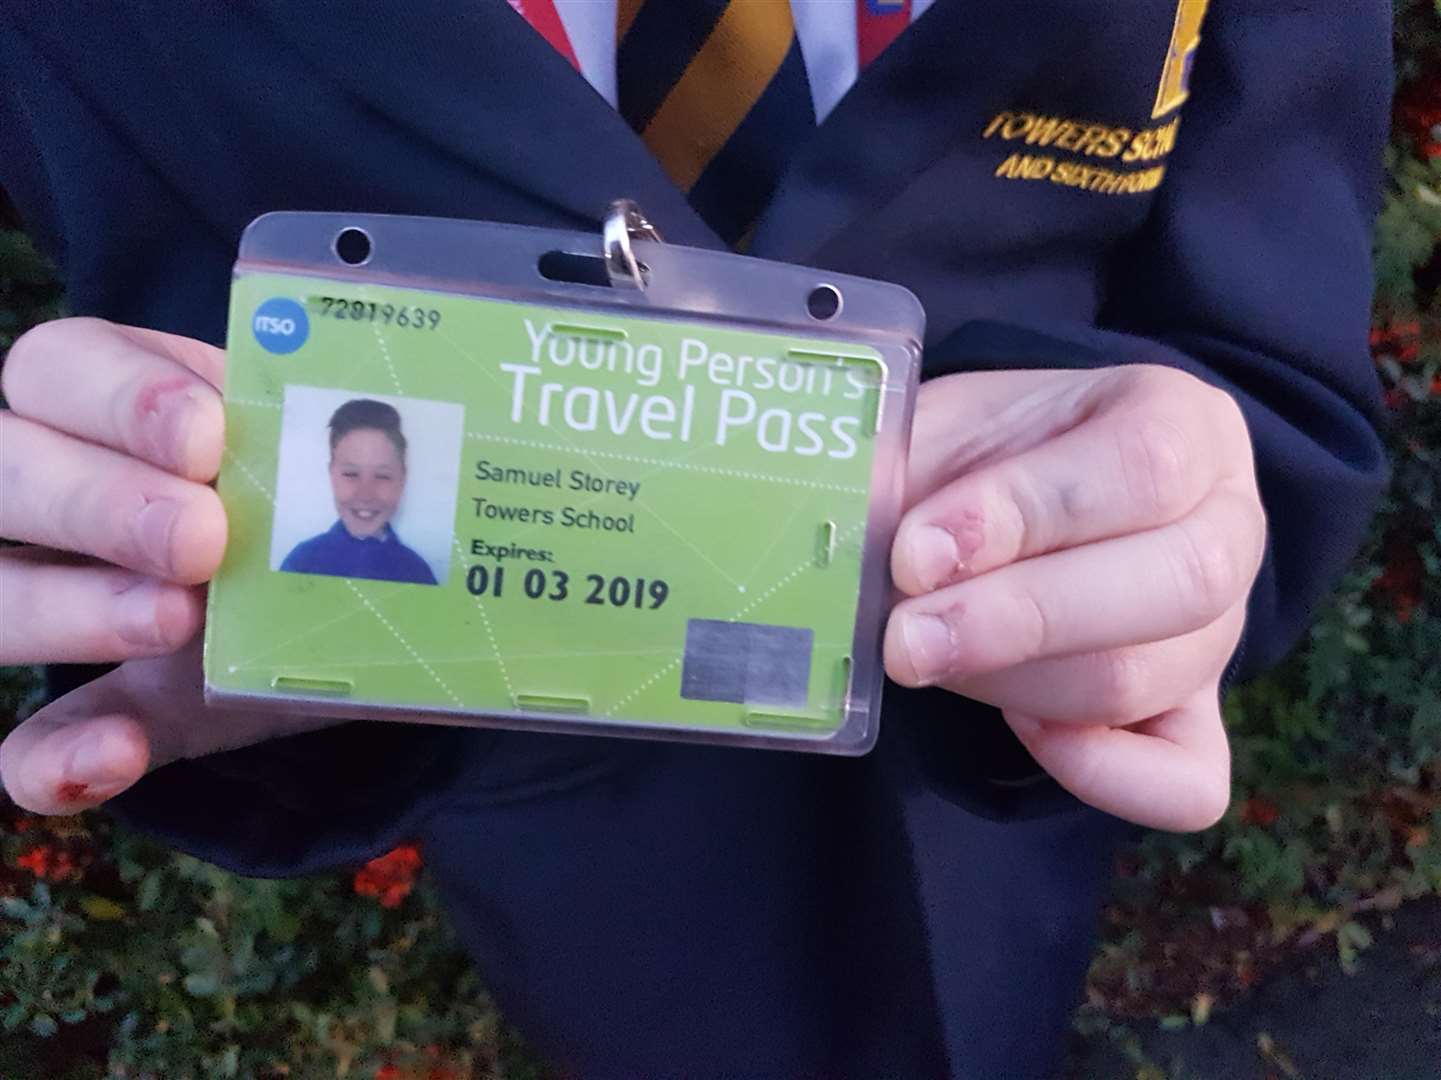 The bus pass in its holder